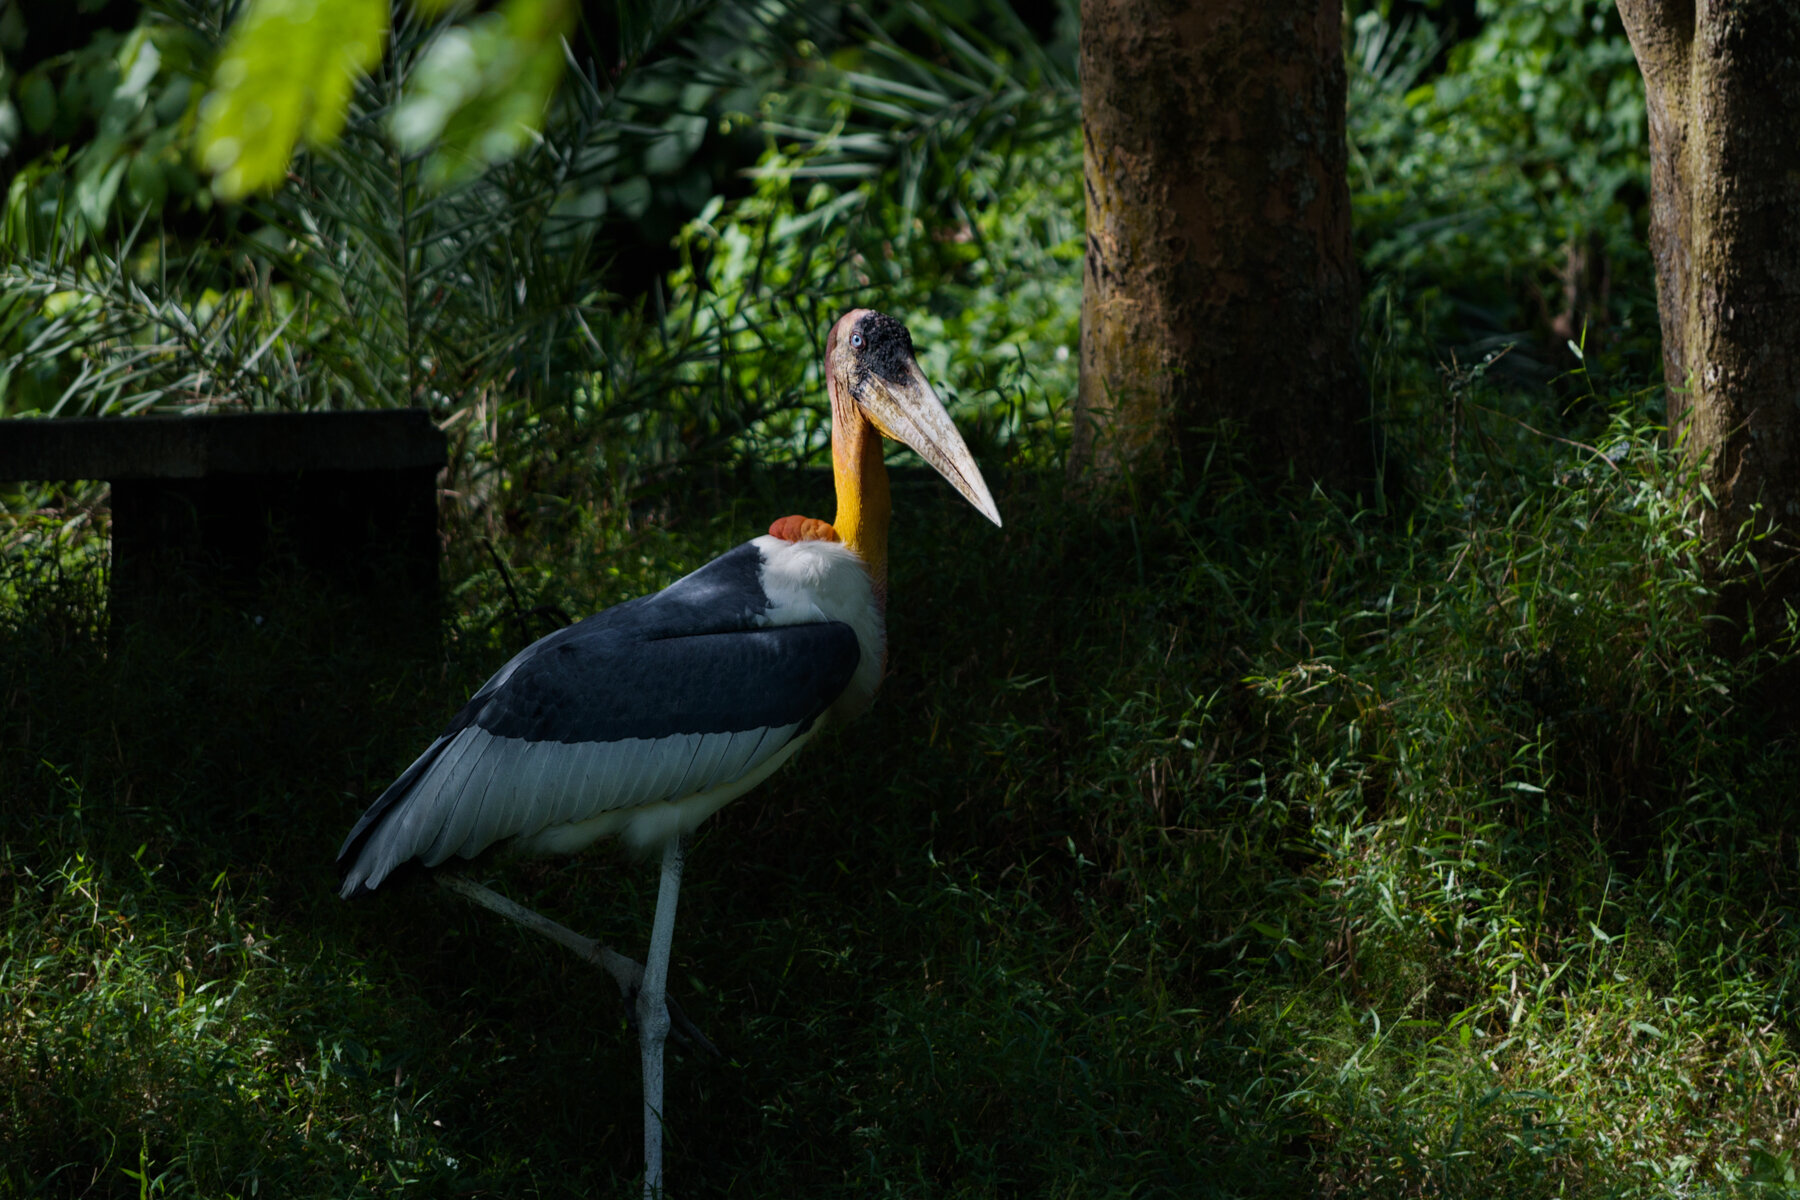  A rescued Greater Adjutant Stork rests at the Assam State Zoo in Guwahati. Young storks sometimes fall from their nests, particularly during the monsoon season. The injured birds are taken to the  zoo's rehabilitation center and are eventually relea